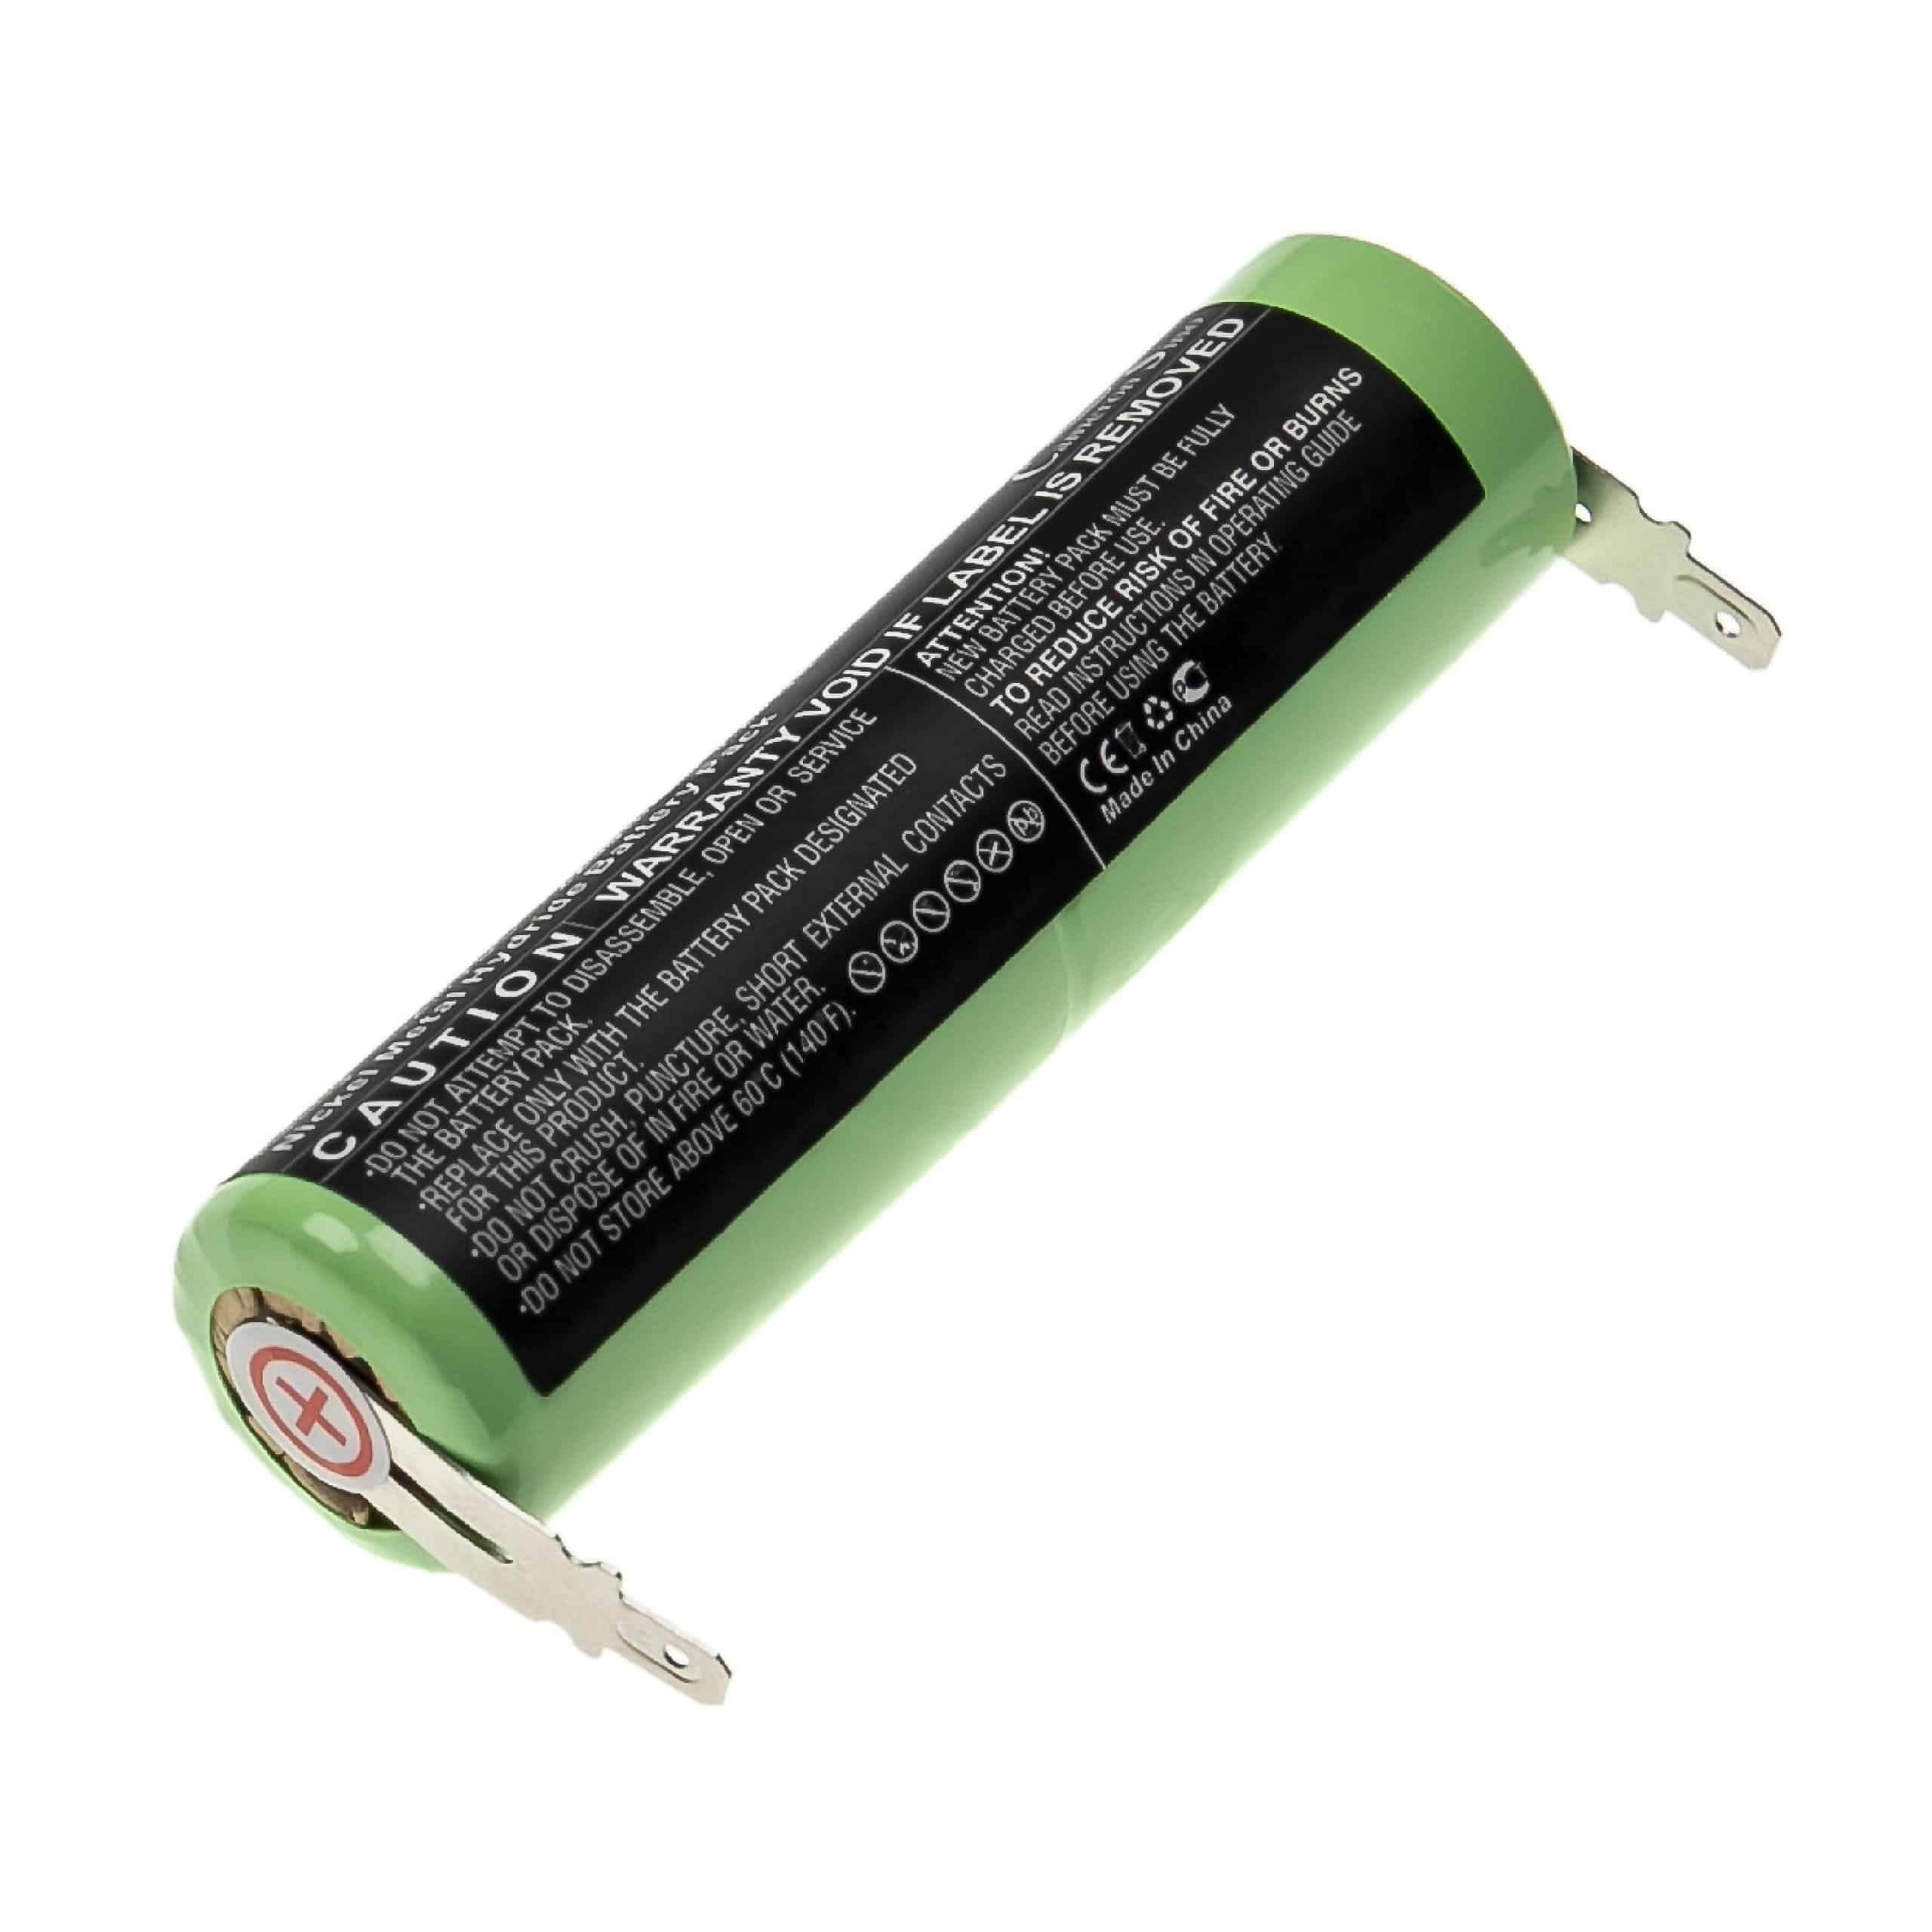 Batterie remplace Kenwood SY9541, BF11956 pour râpe a fromage - 2200mAh 2,4V NiMH